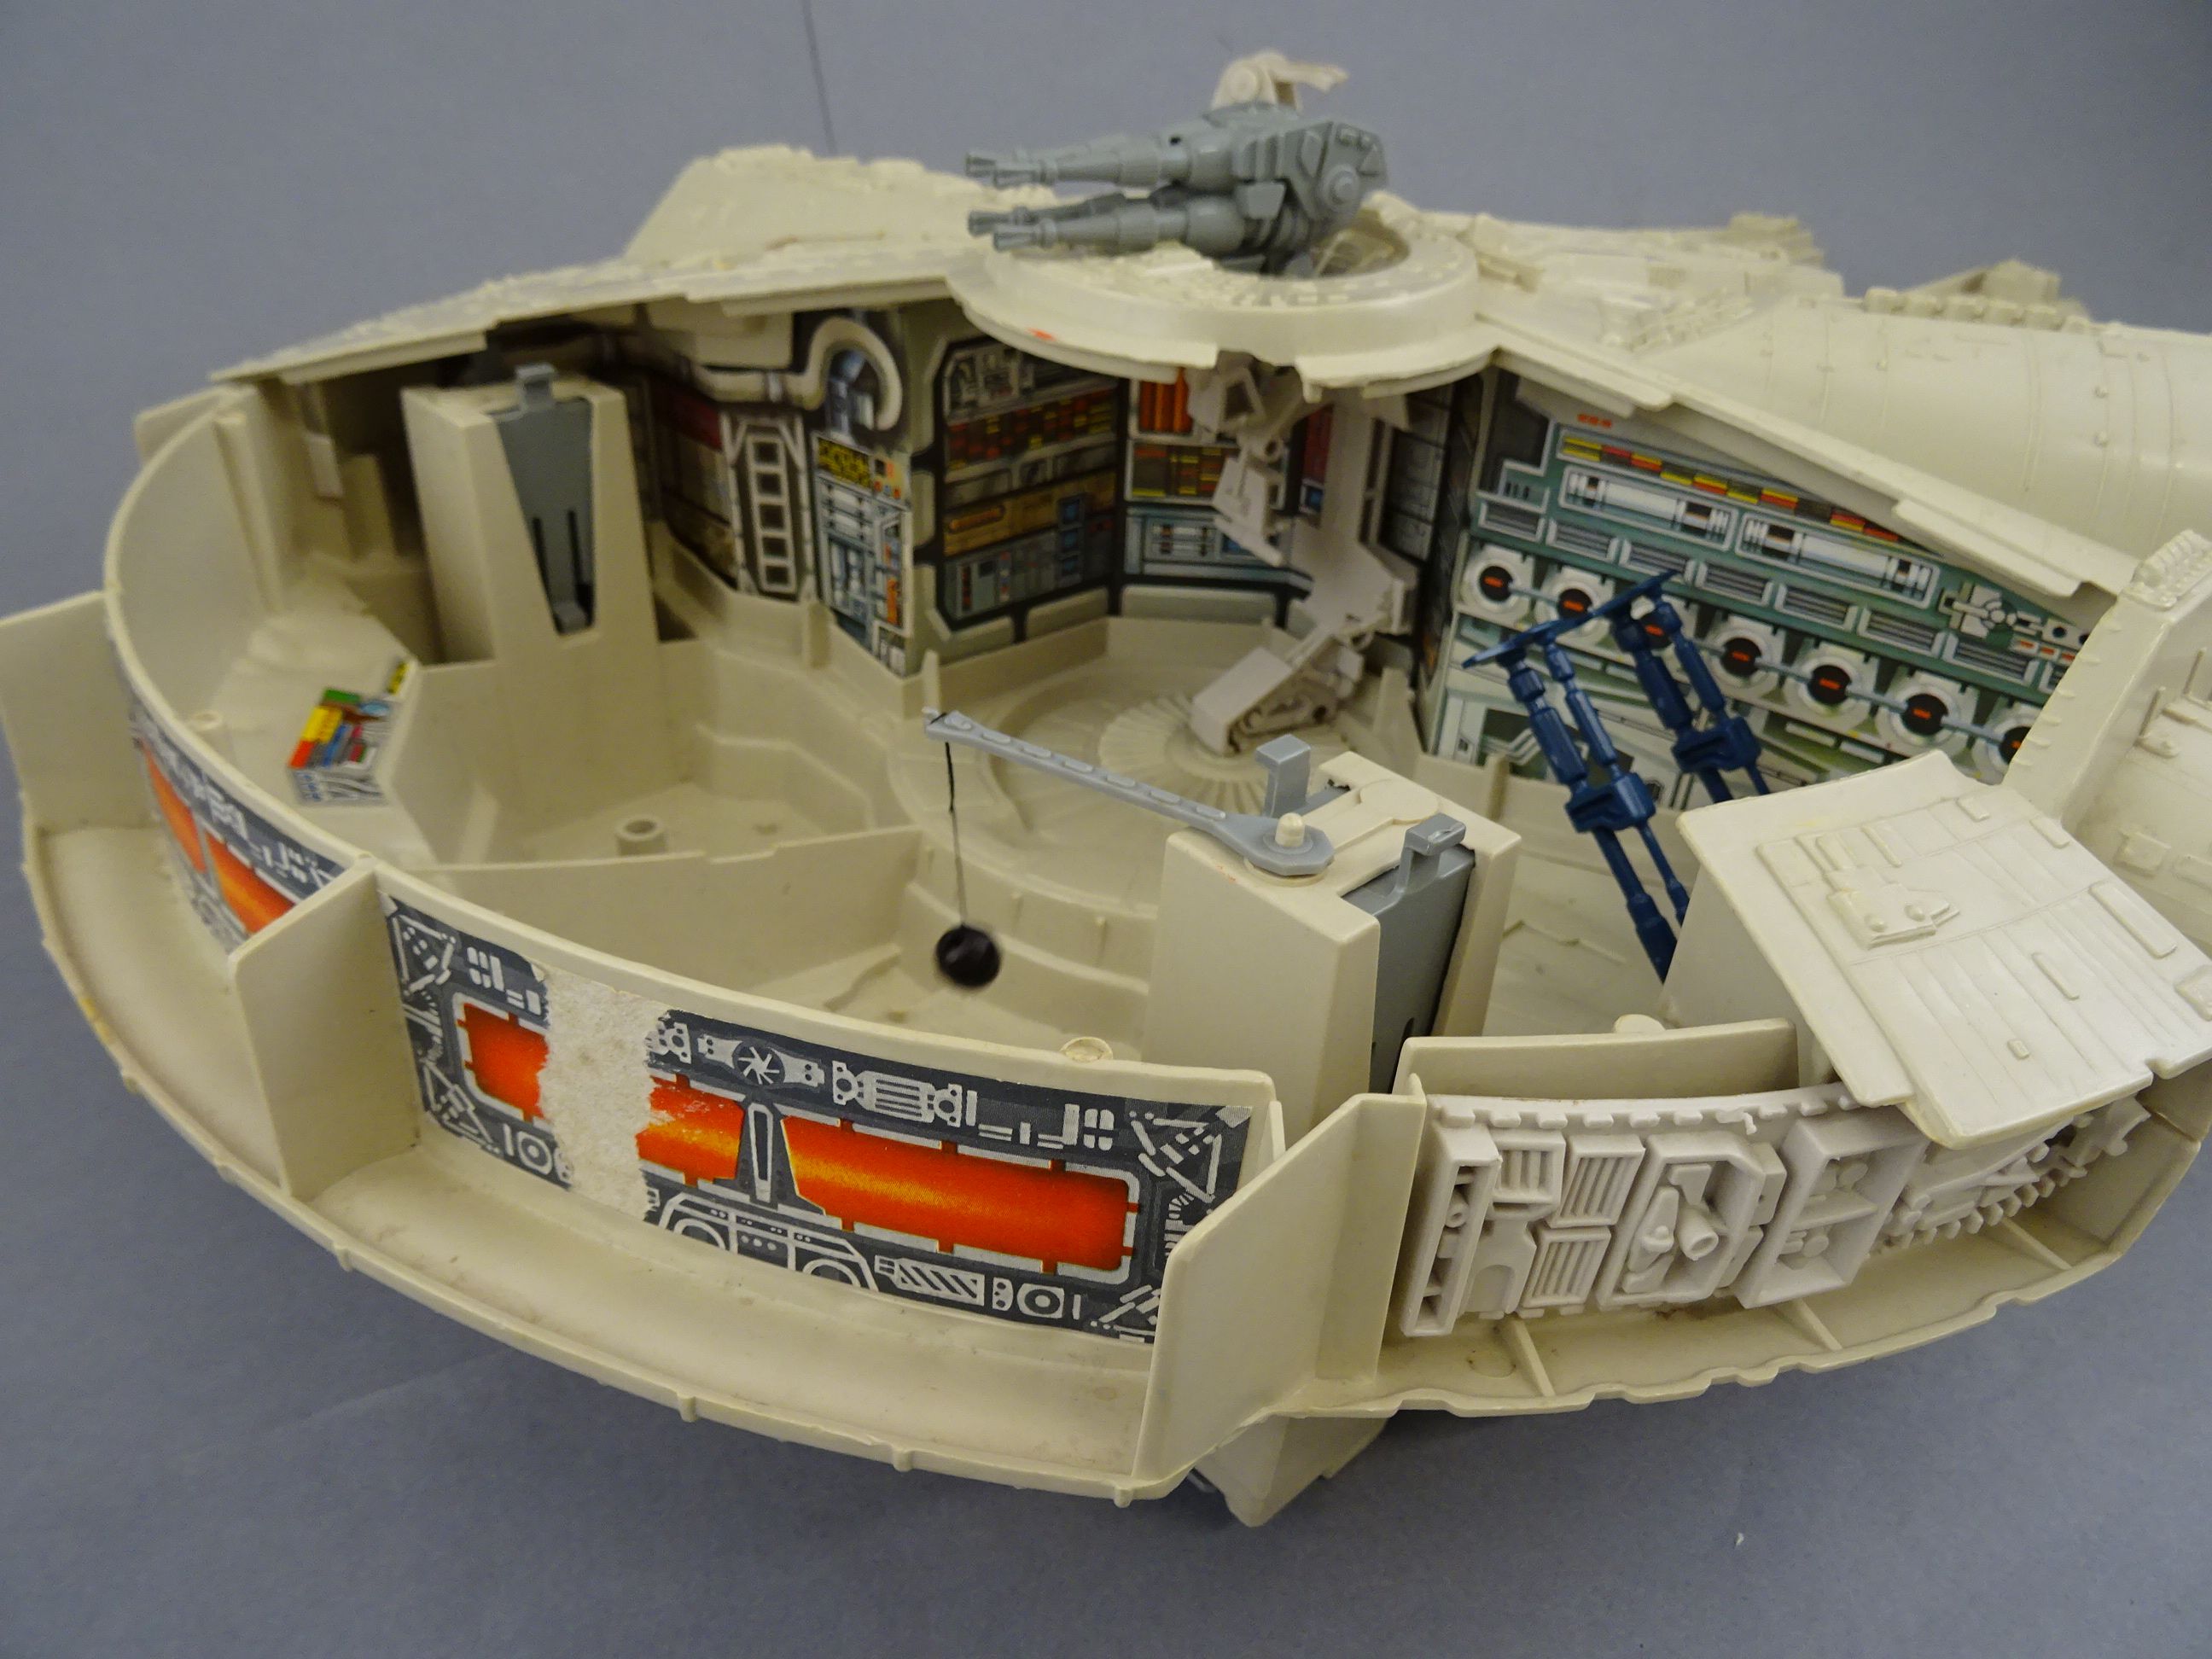 Star Wars - Original boxed Palitoy Star Wars Return of the Jedi Millennium Falcon Vehicle in good - Image 7 of 11